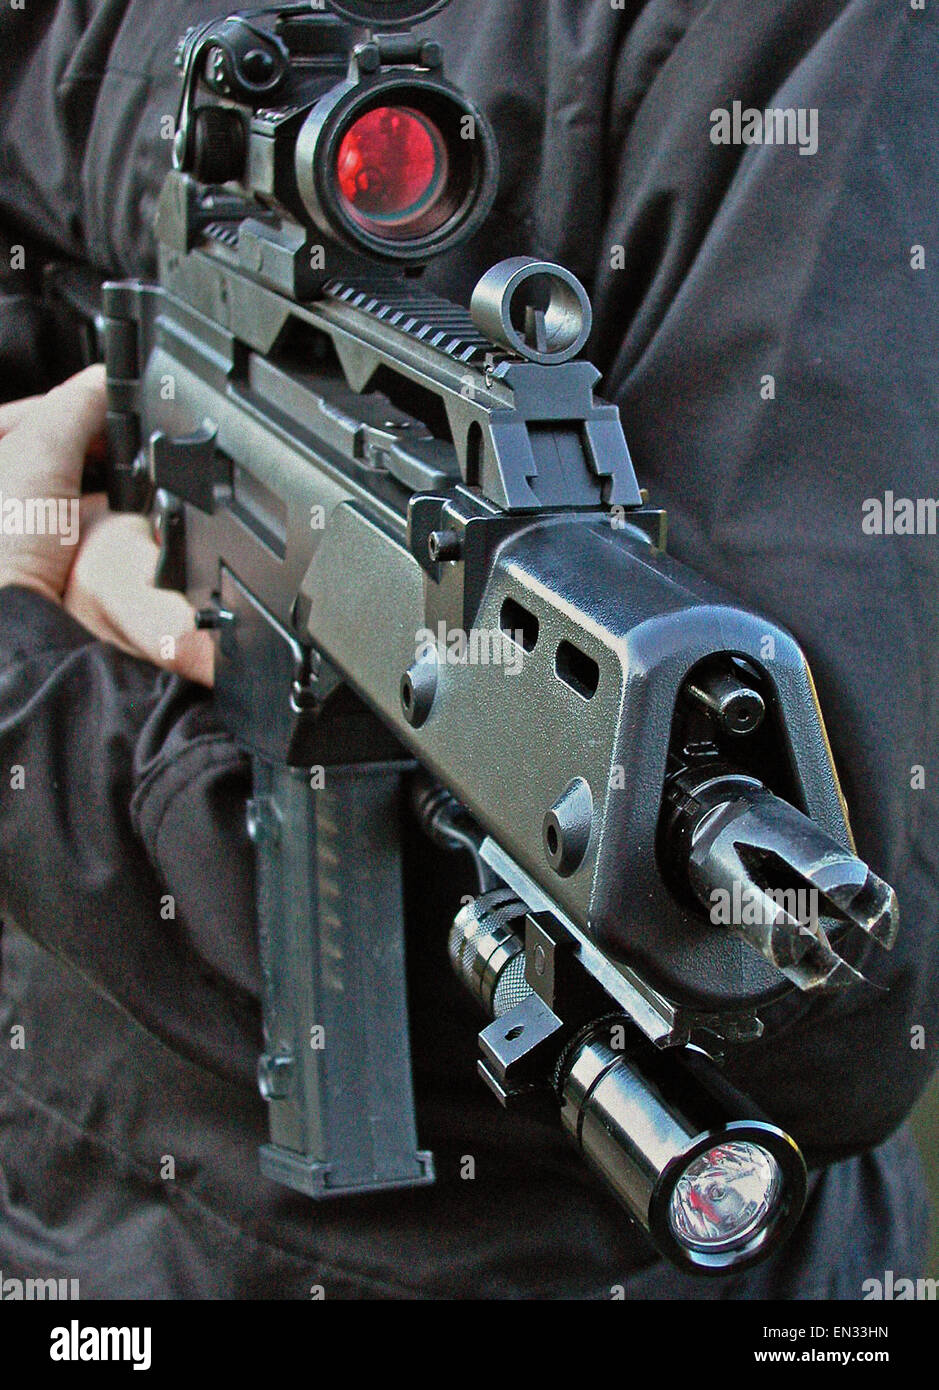 A Heckler & Koch  G36 C (5.56mm x 45 NATO calibre  gas operated assault rifle) favoured by British law enforcement (Police). It has the dimensions of a submachine gun combined with the penetration capability of the 5.56 NATO calibre. Stock Photo